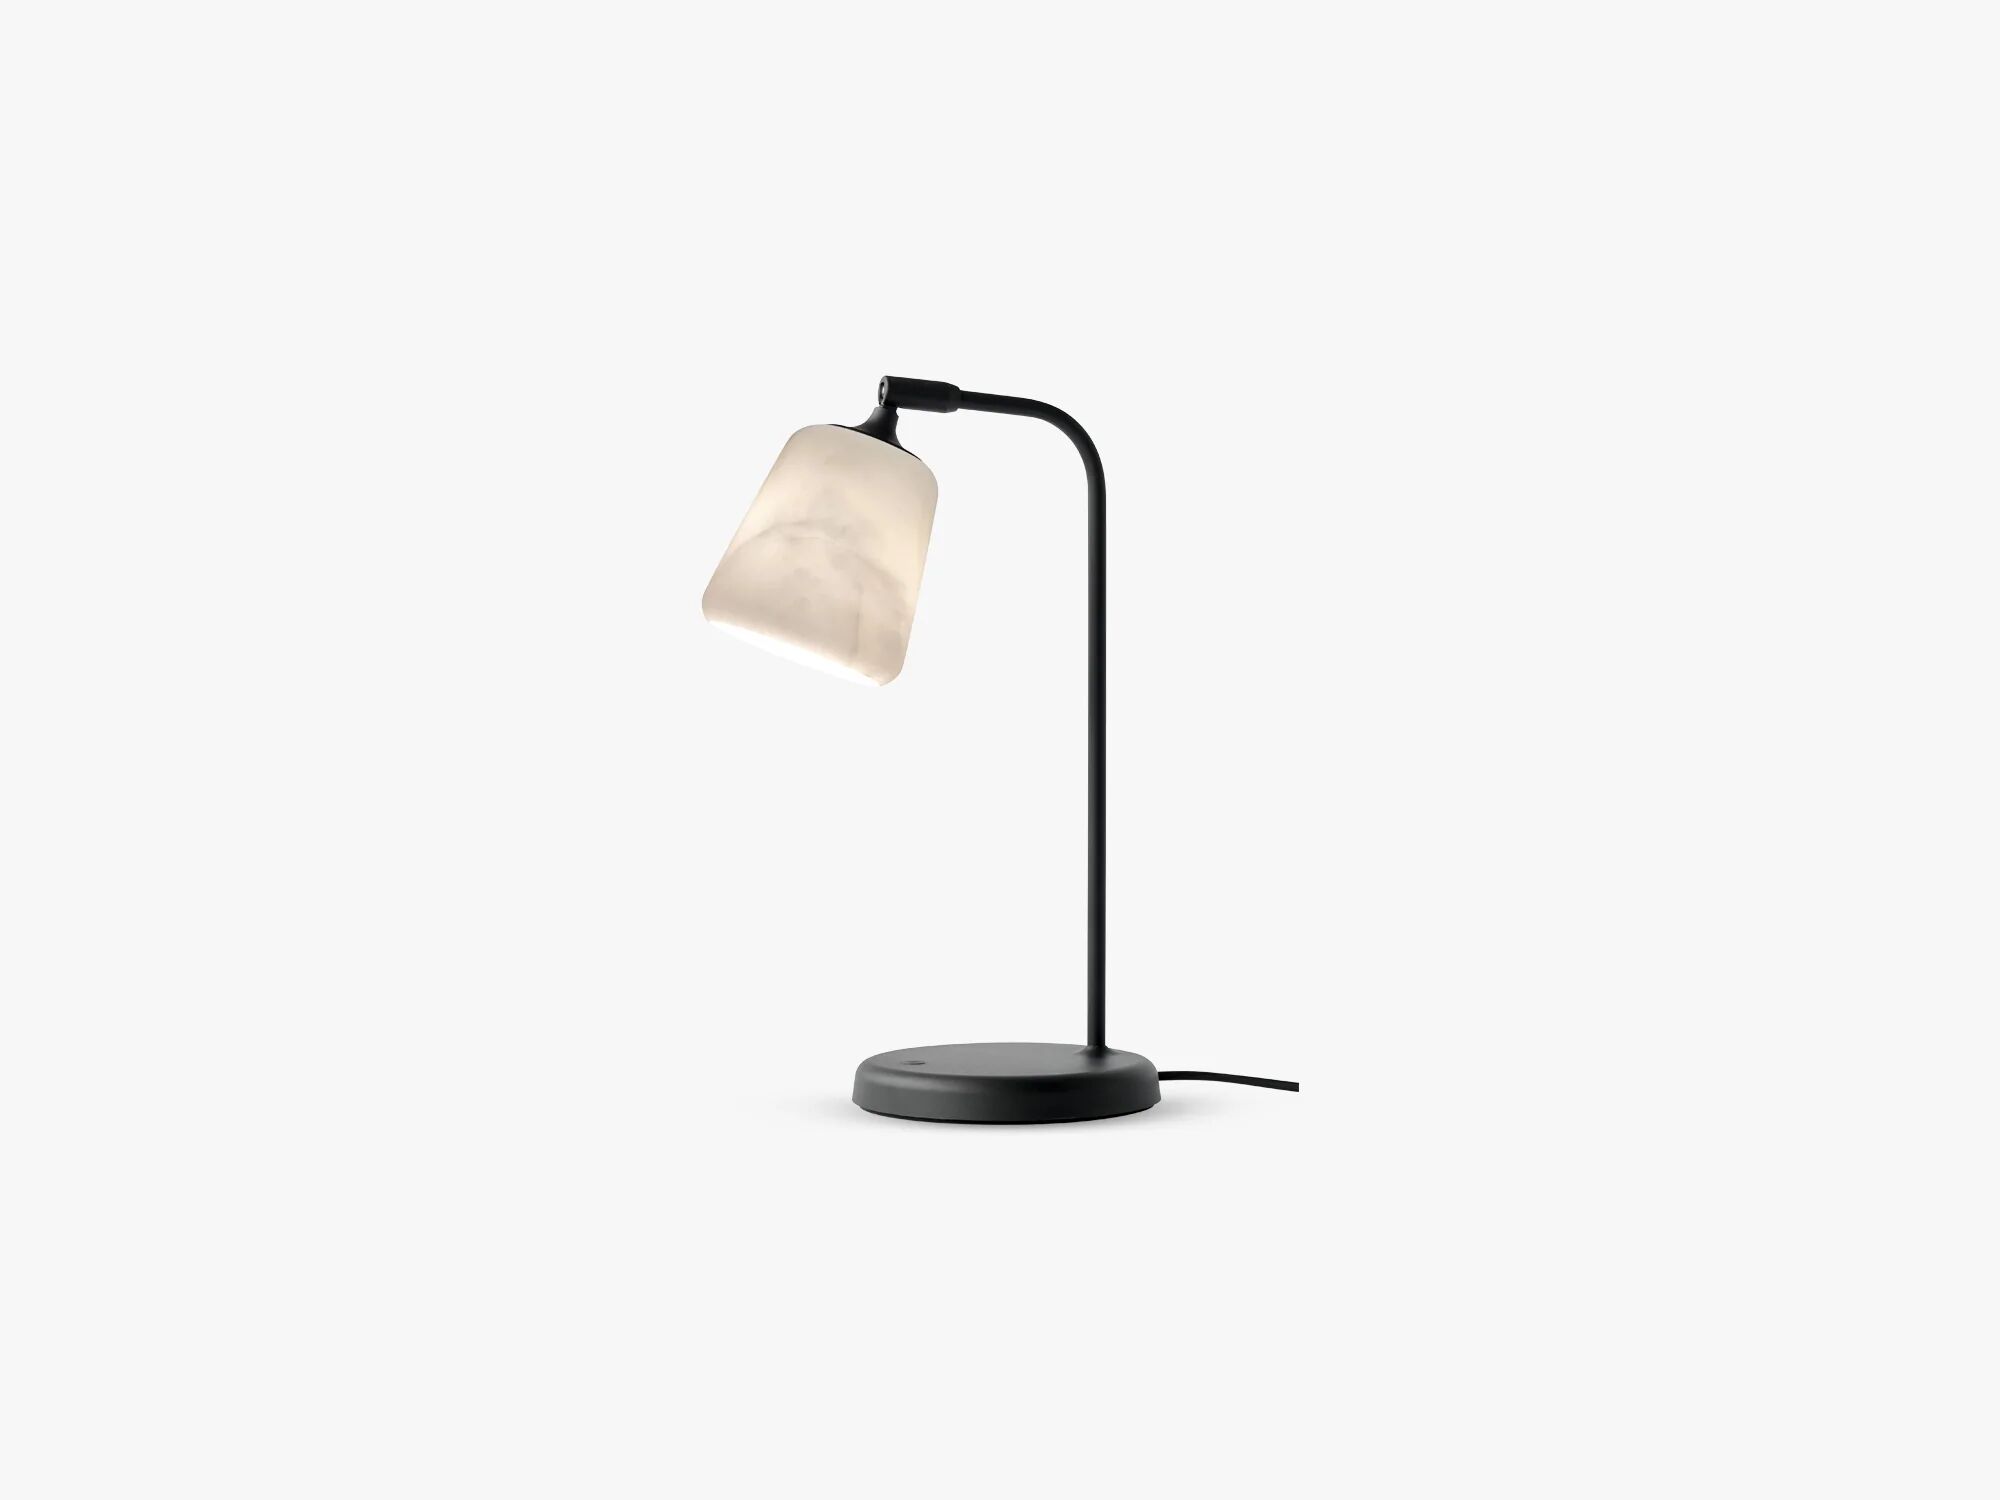 New Works Materiale bordlampe, Black Sheep(Wh Marmor / BL)